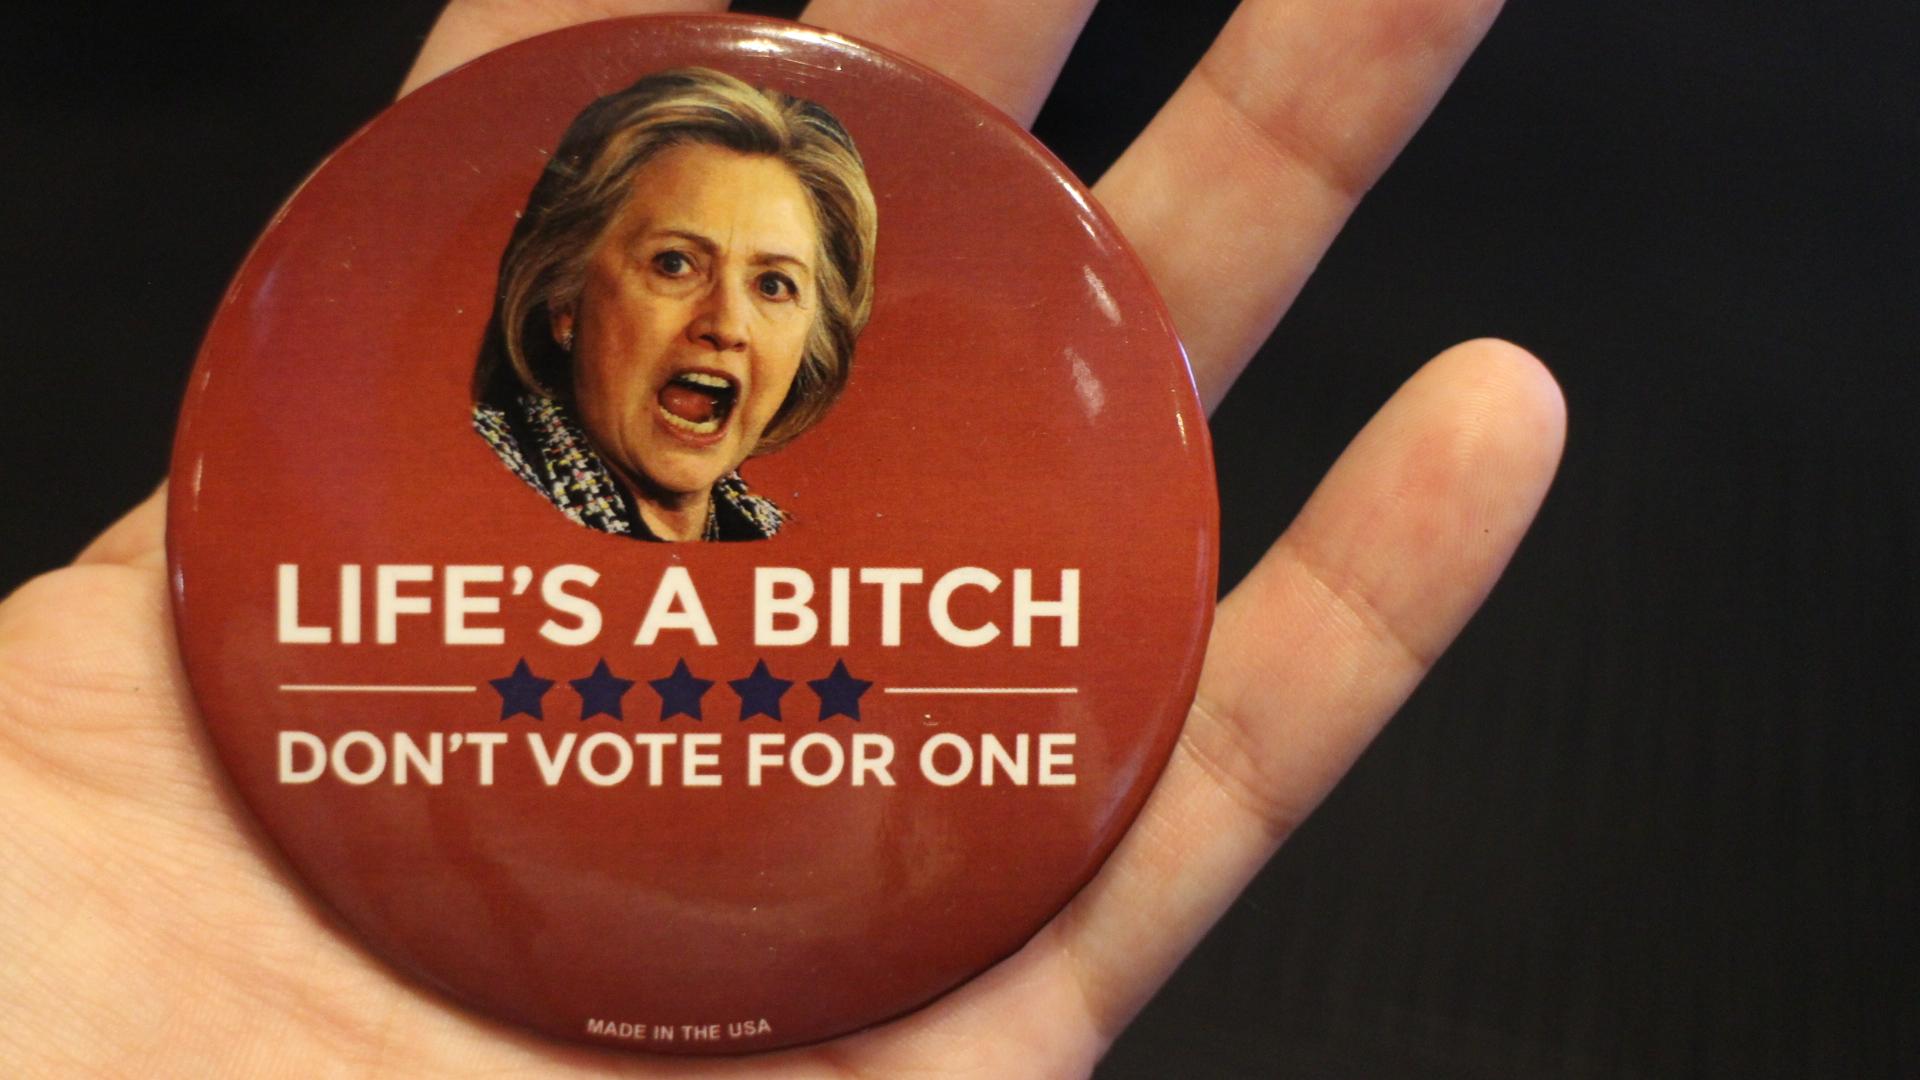 Buttons and T-shirts sold outside the Republican National Convention referred to Democratic candidate Hillary Clinton as a 